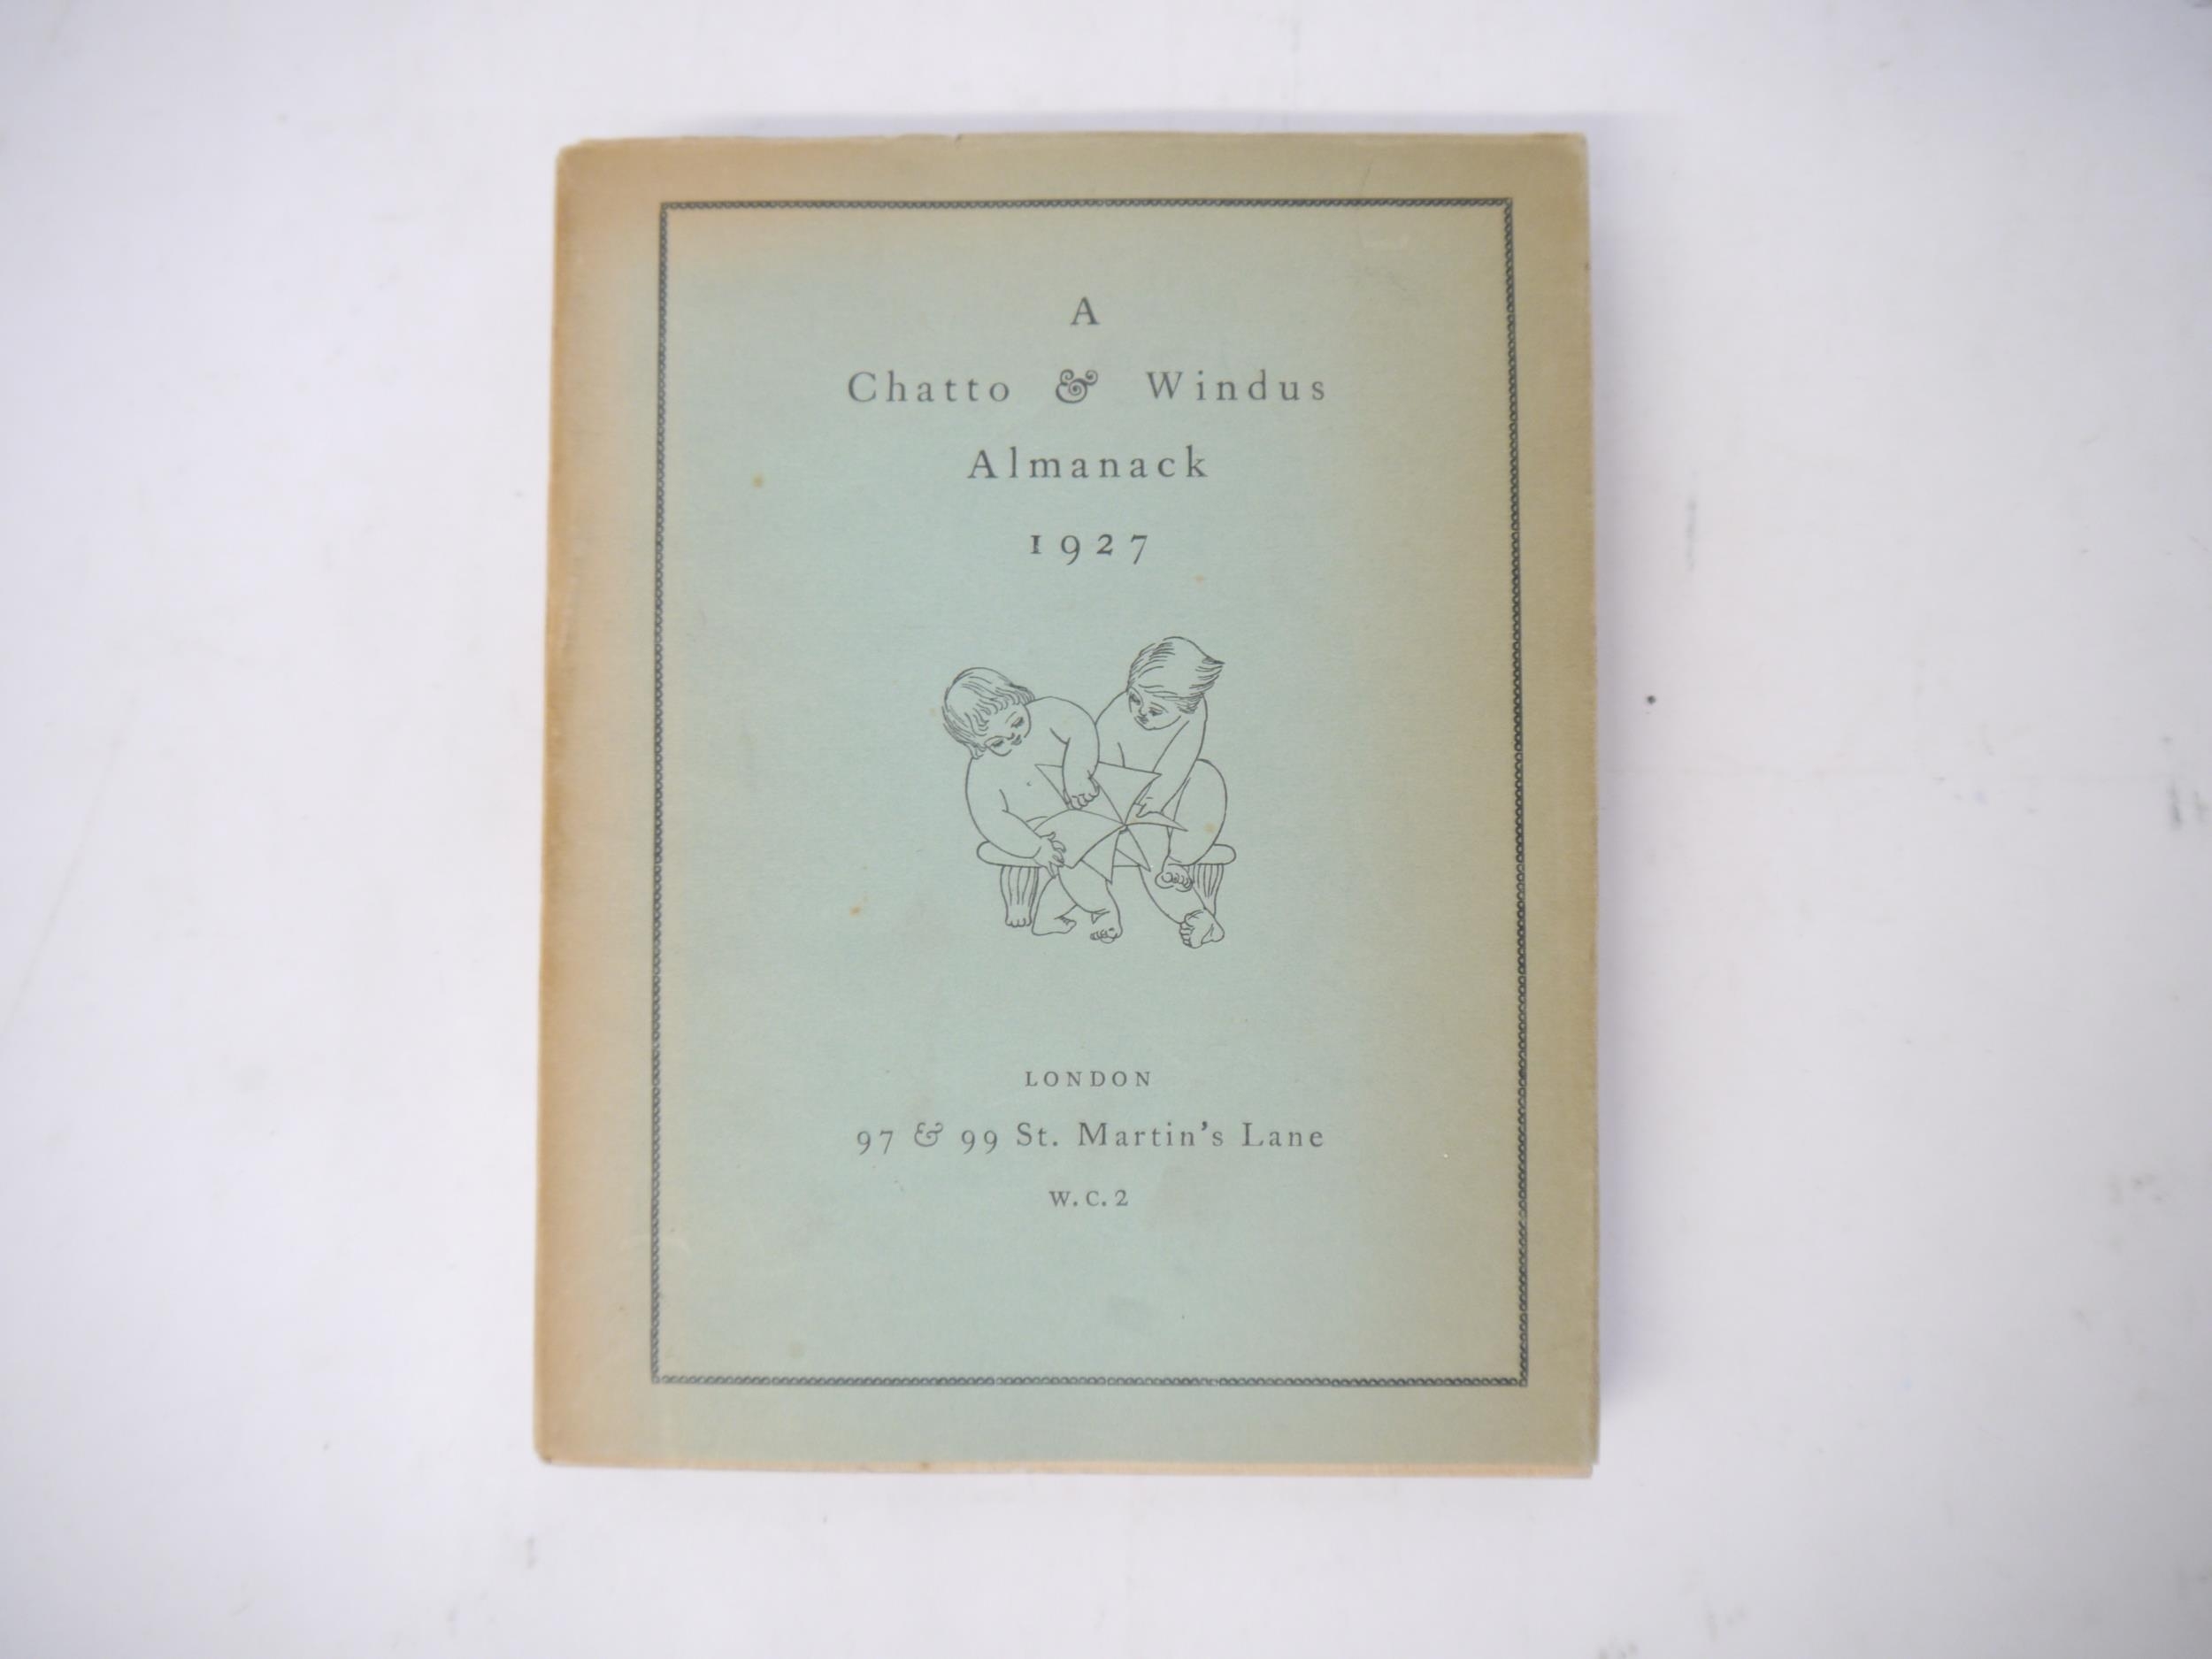 Stanley Spencer (illustrated): 'A Chatto & Windus Almanack 1927. With Designs by Stanley Spencer',